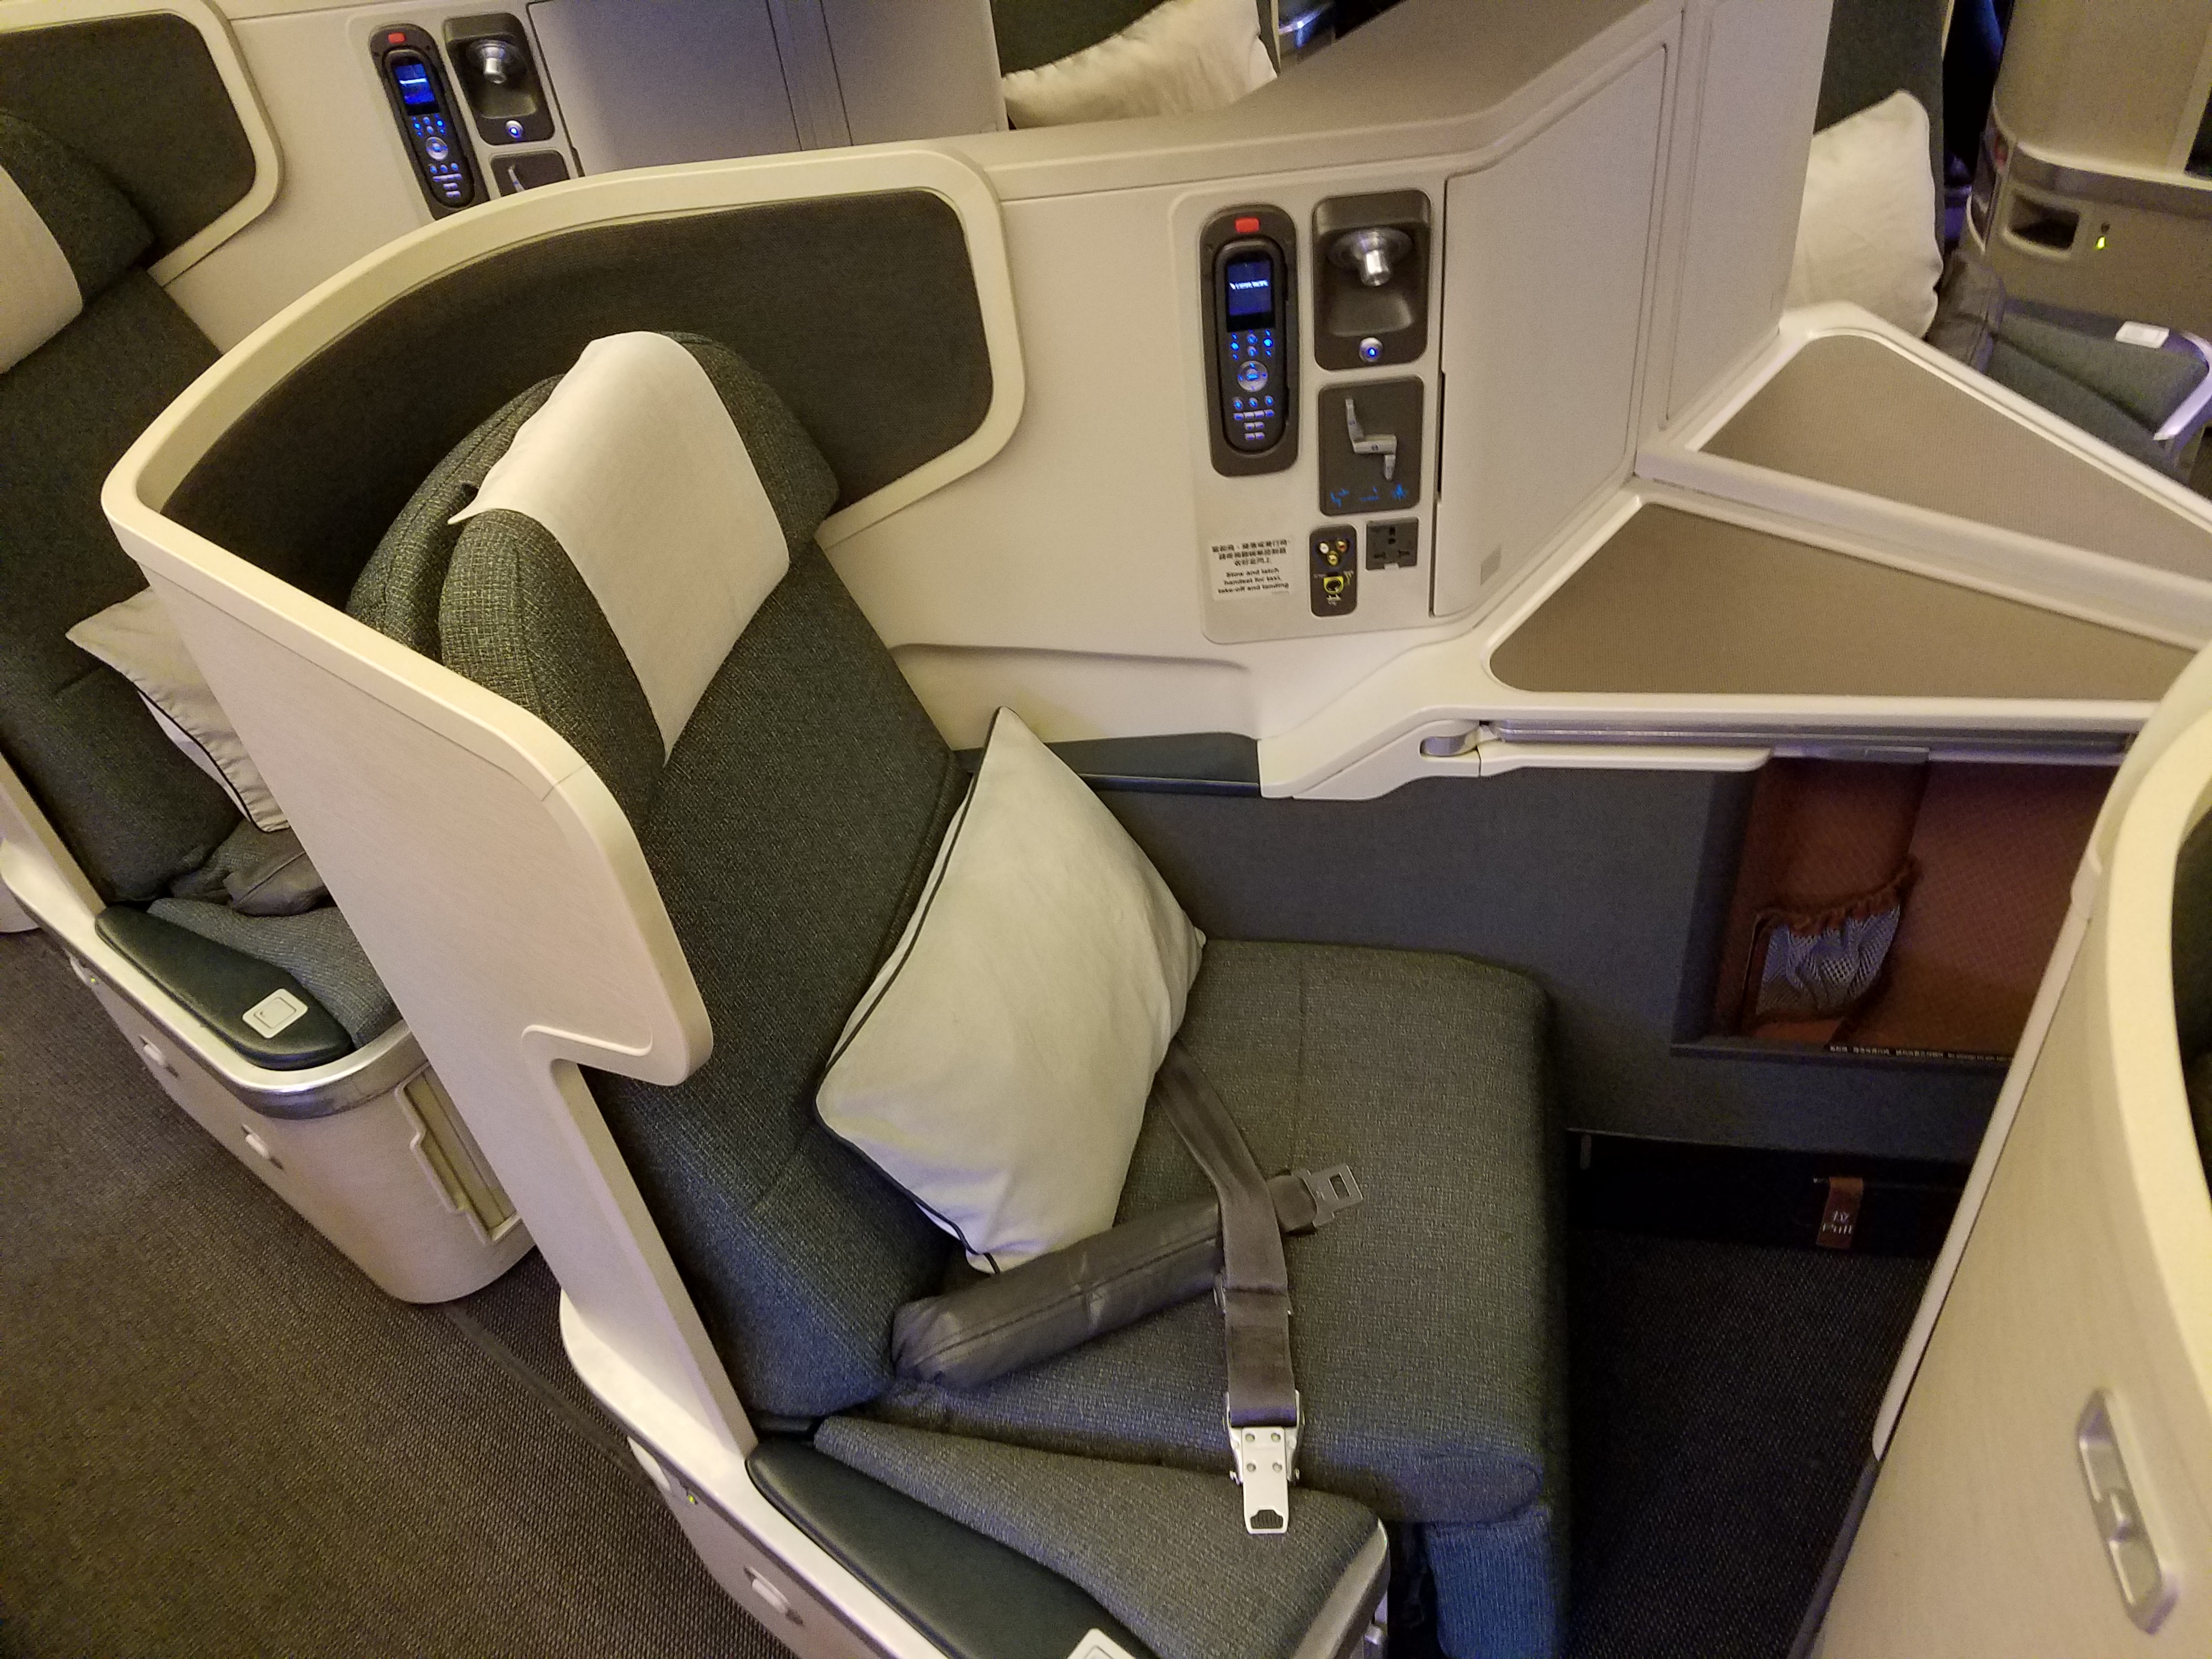 Wide Open Cathay Pacific Business Class Award Space For 4 Passengers From Severa..